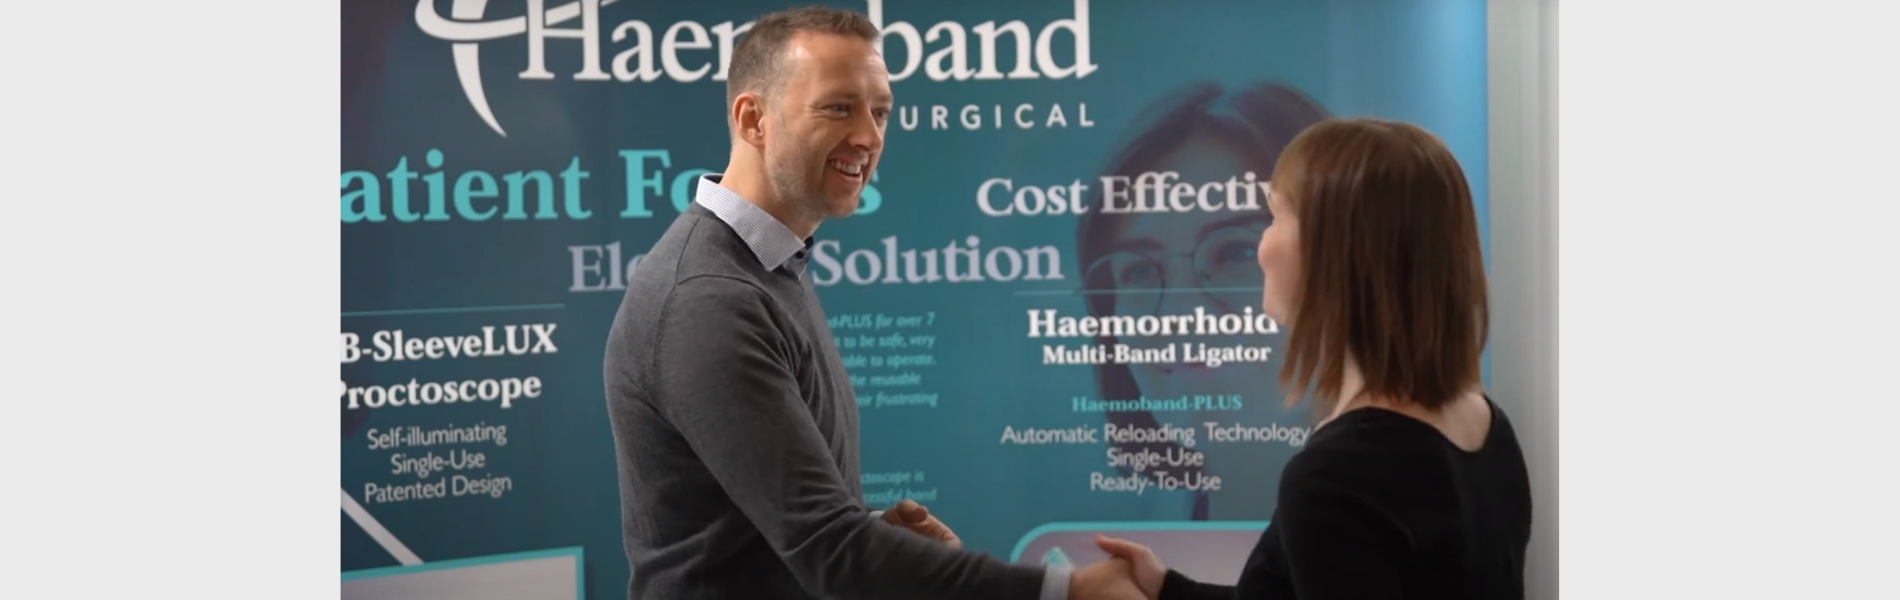 Haemoband Surgical’s Successful MEDICA Exhibition, New Product Launch & More